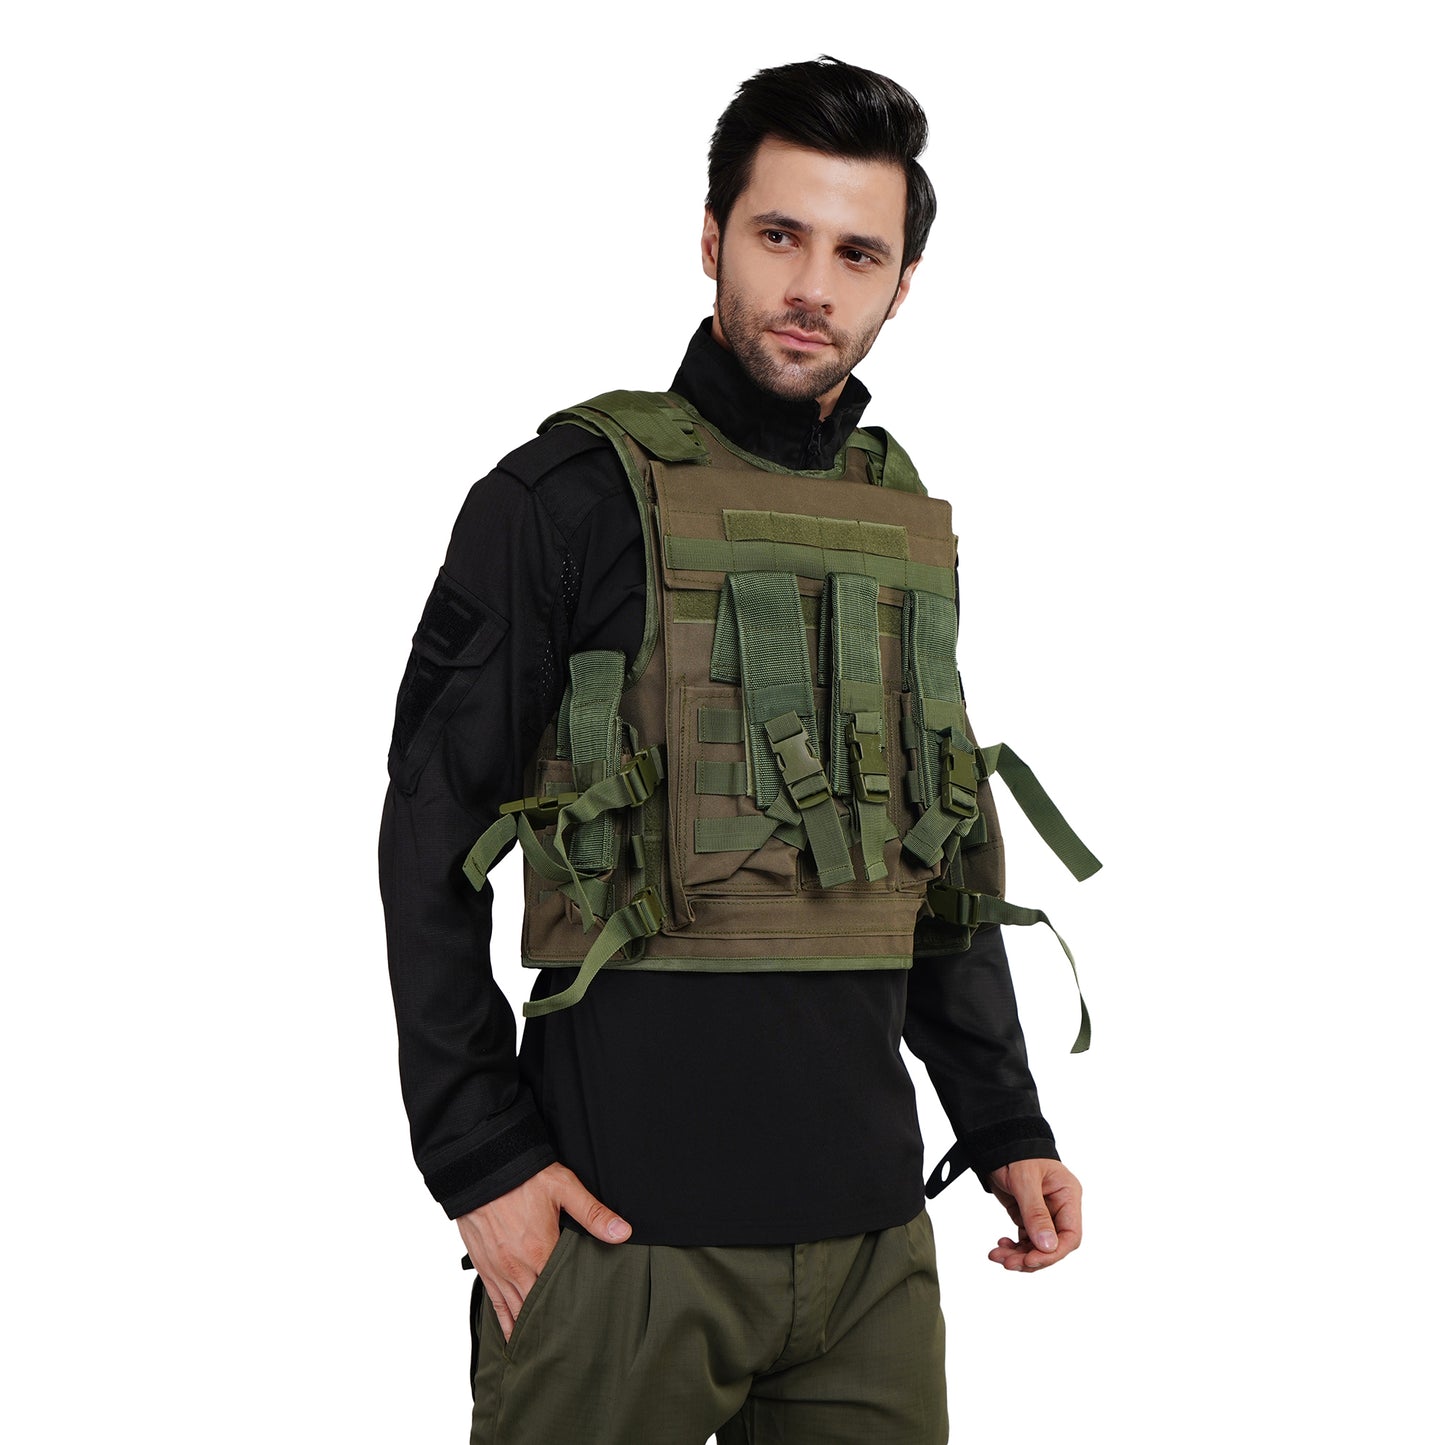 Tactical Vest Pouch with Bulletproof Jacket Cover Dark Olive Green - Premium Quality